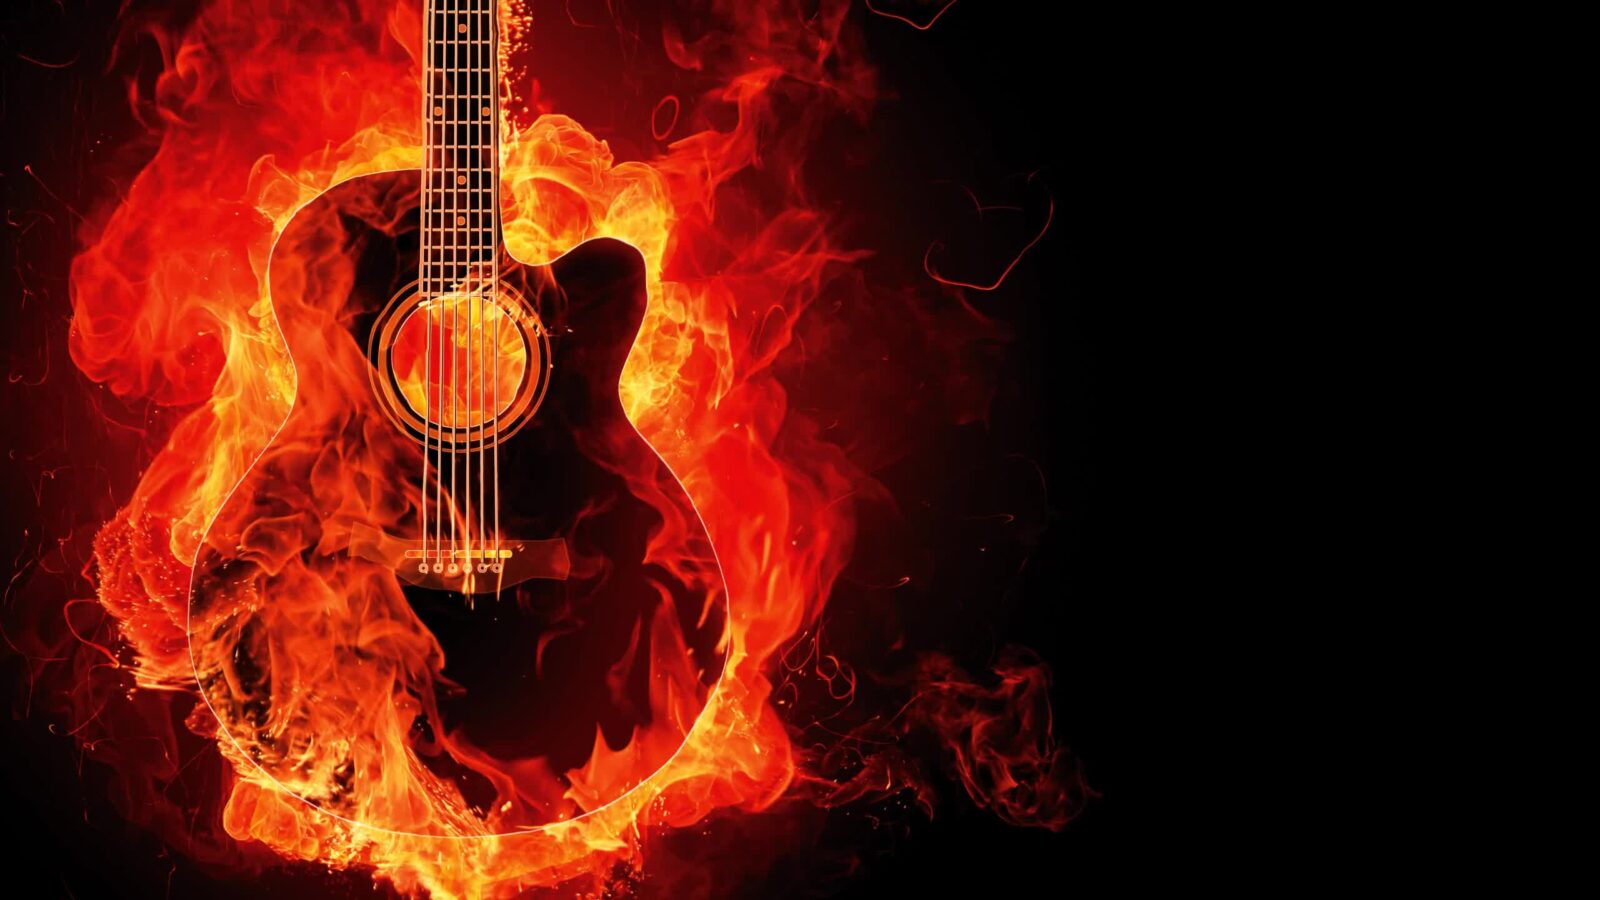 LiveWallpapers4Free.com | Guitar Flame Fantasy Abstract 2K Quality - Free Live Wallpaper